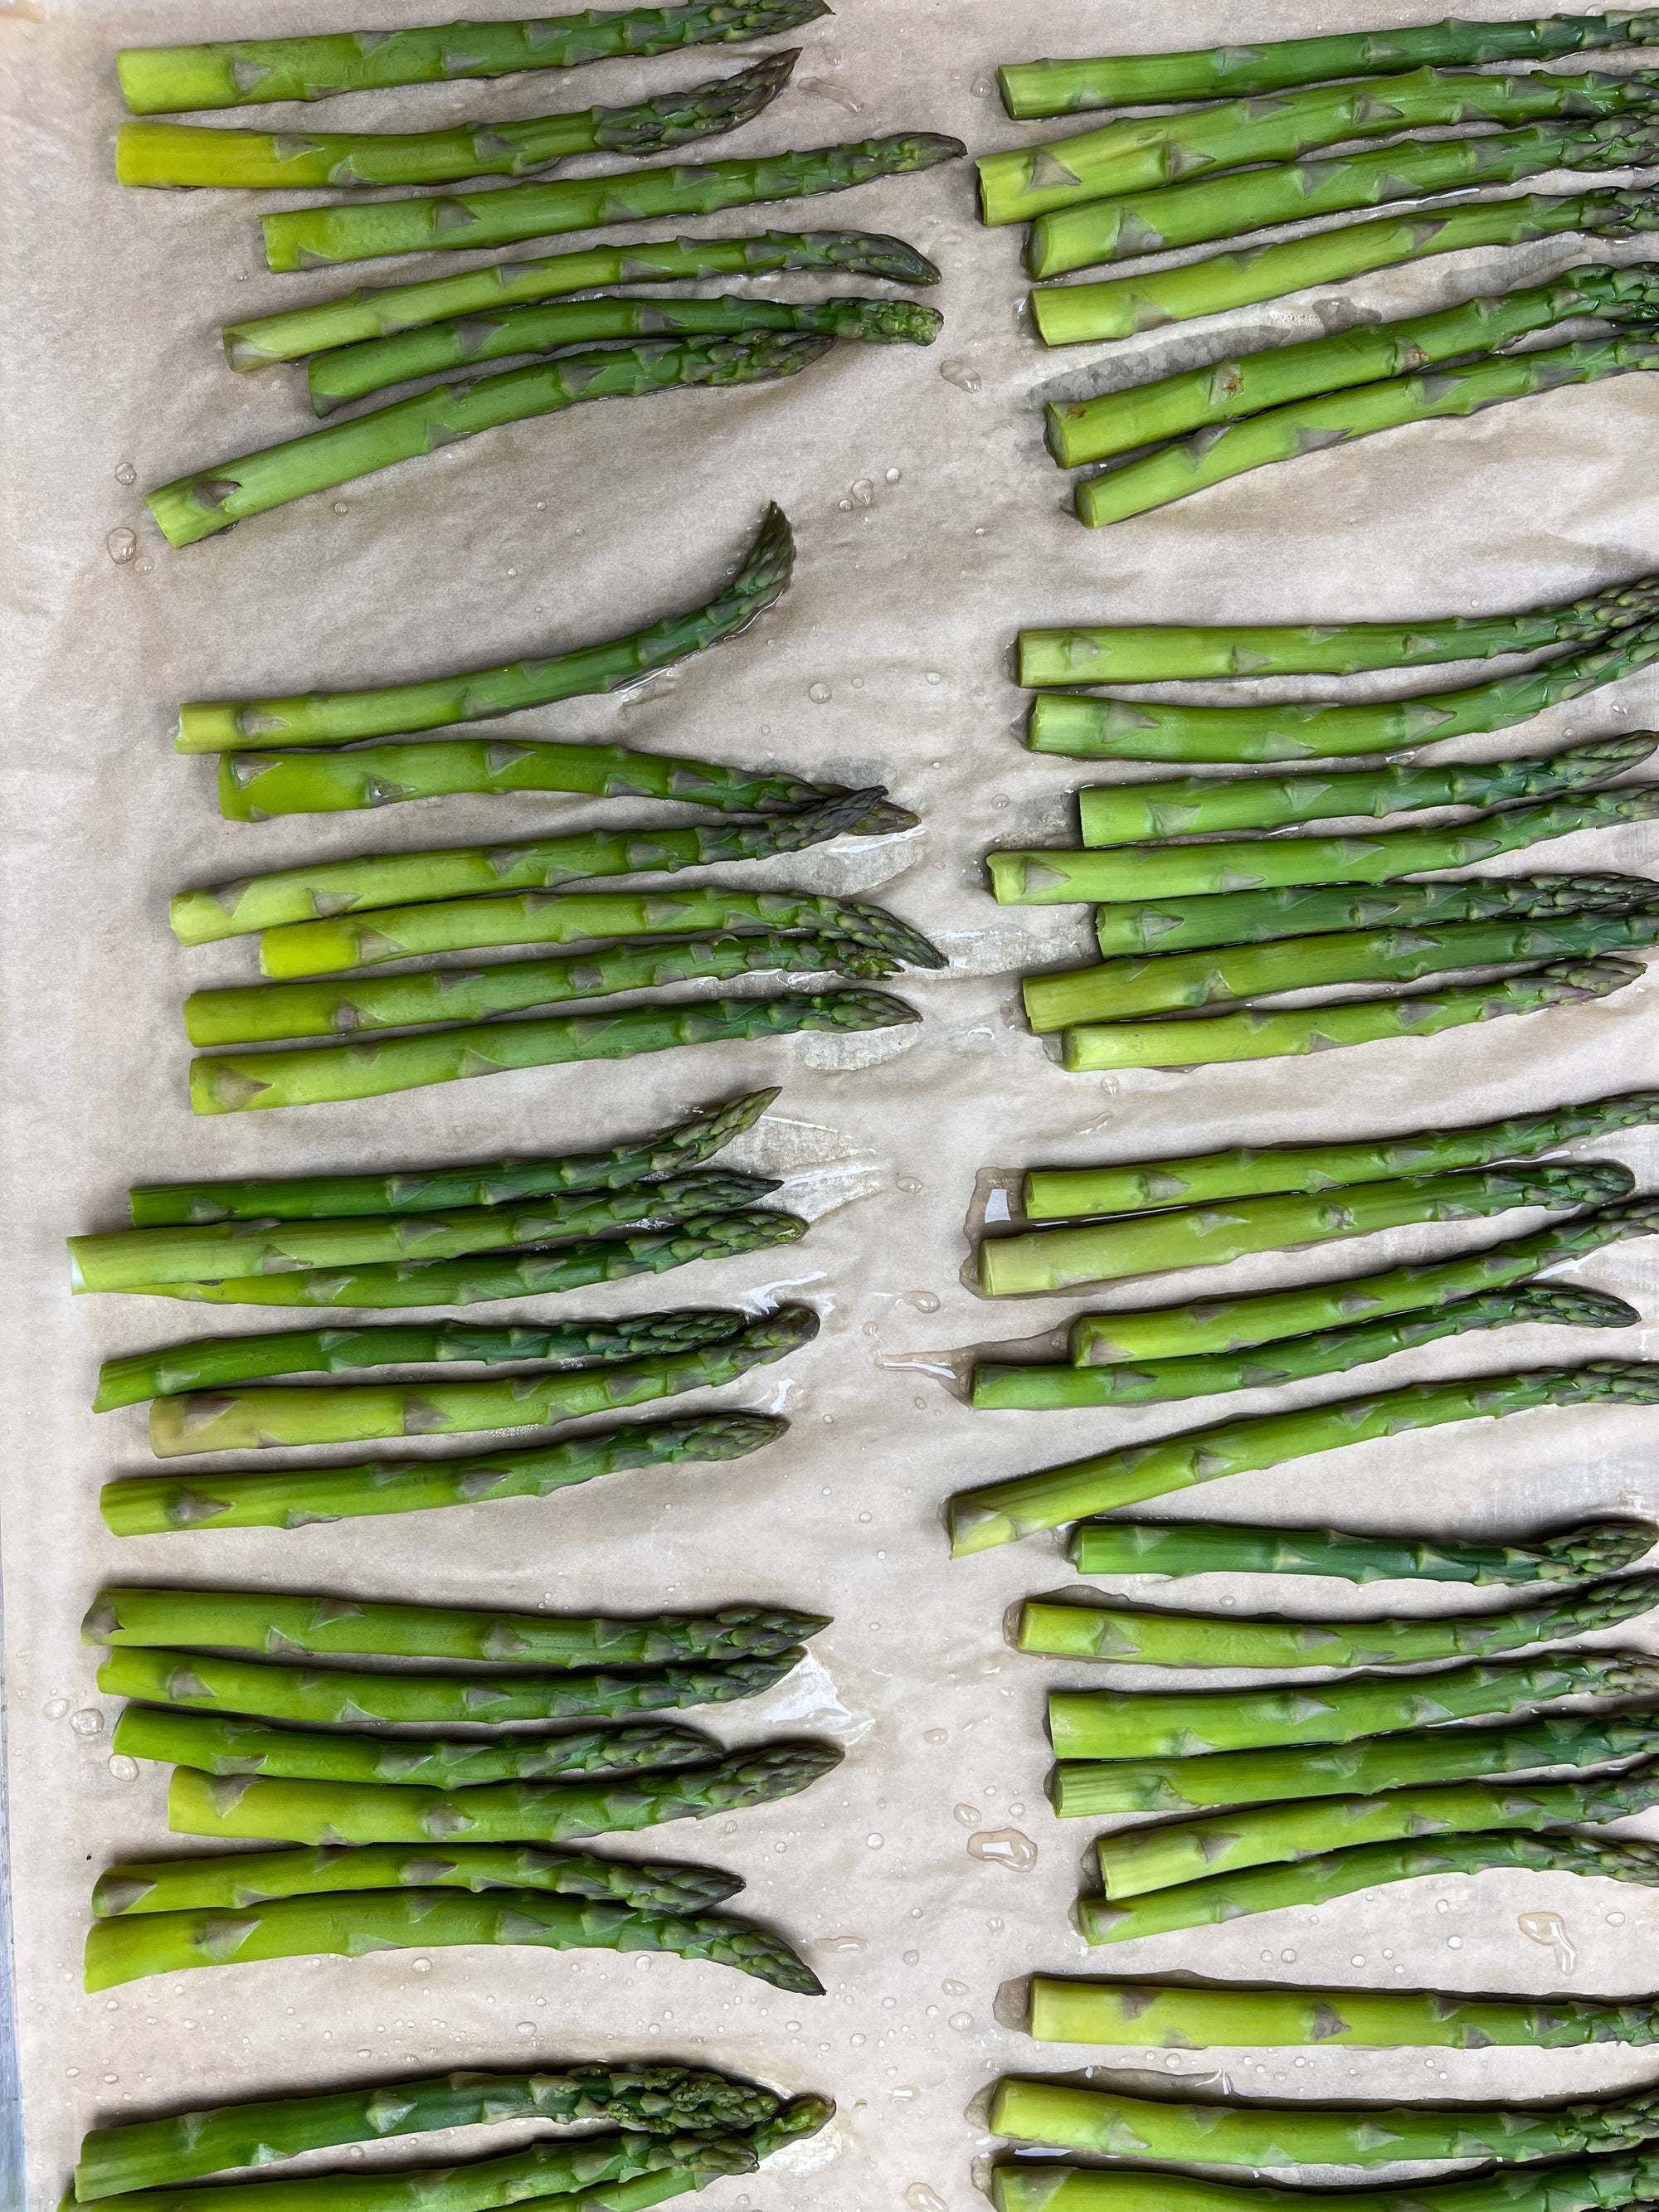 Steamed Asparagus *Required element for Lunch Day 4, 5, 6 and Dinner Day 4 & 6, & 7